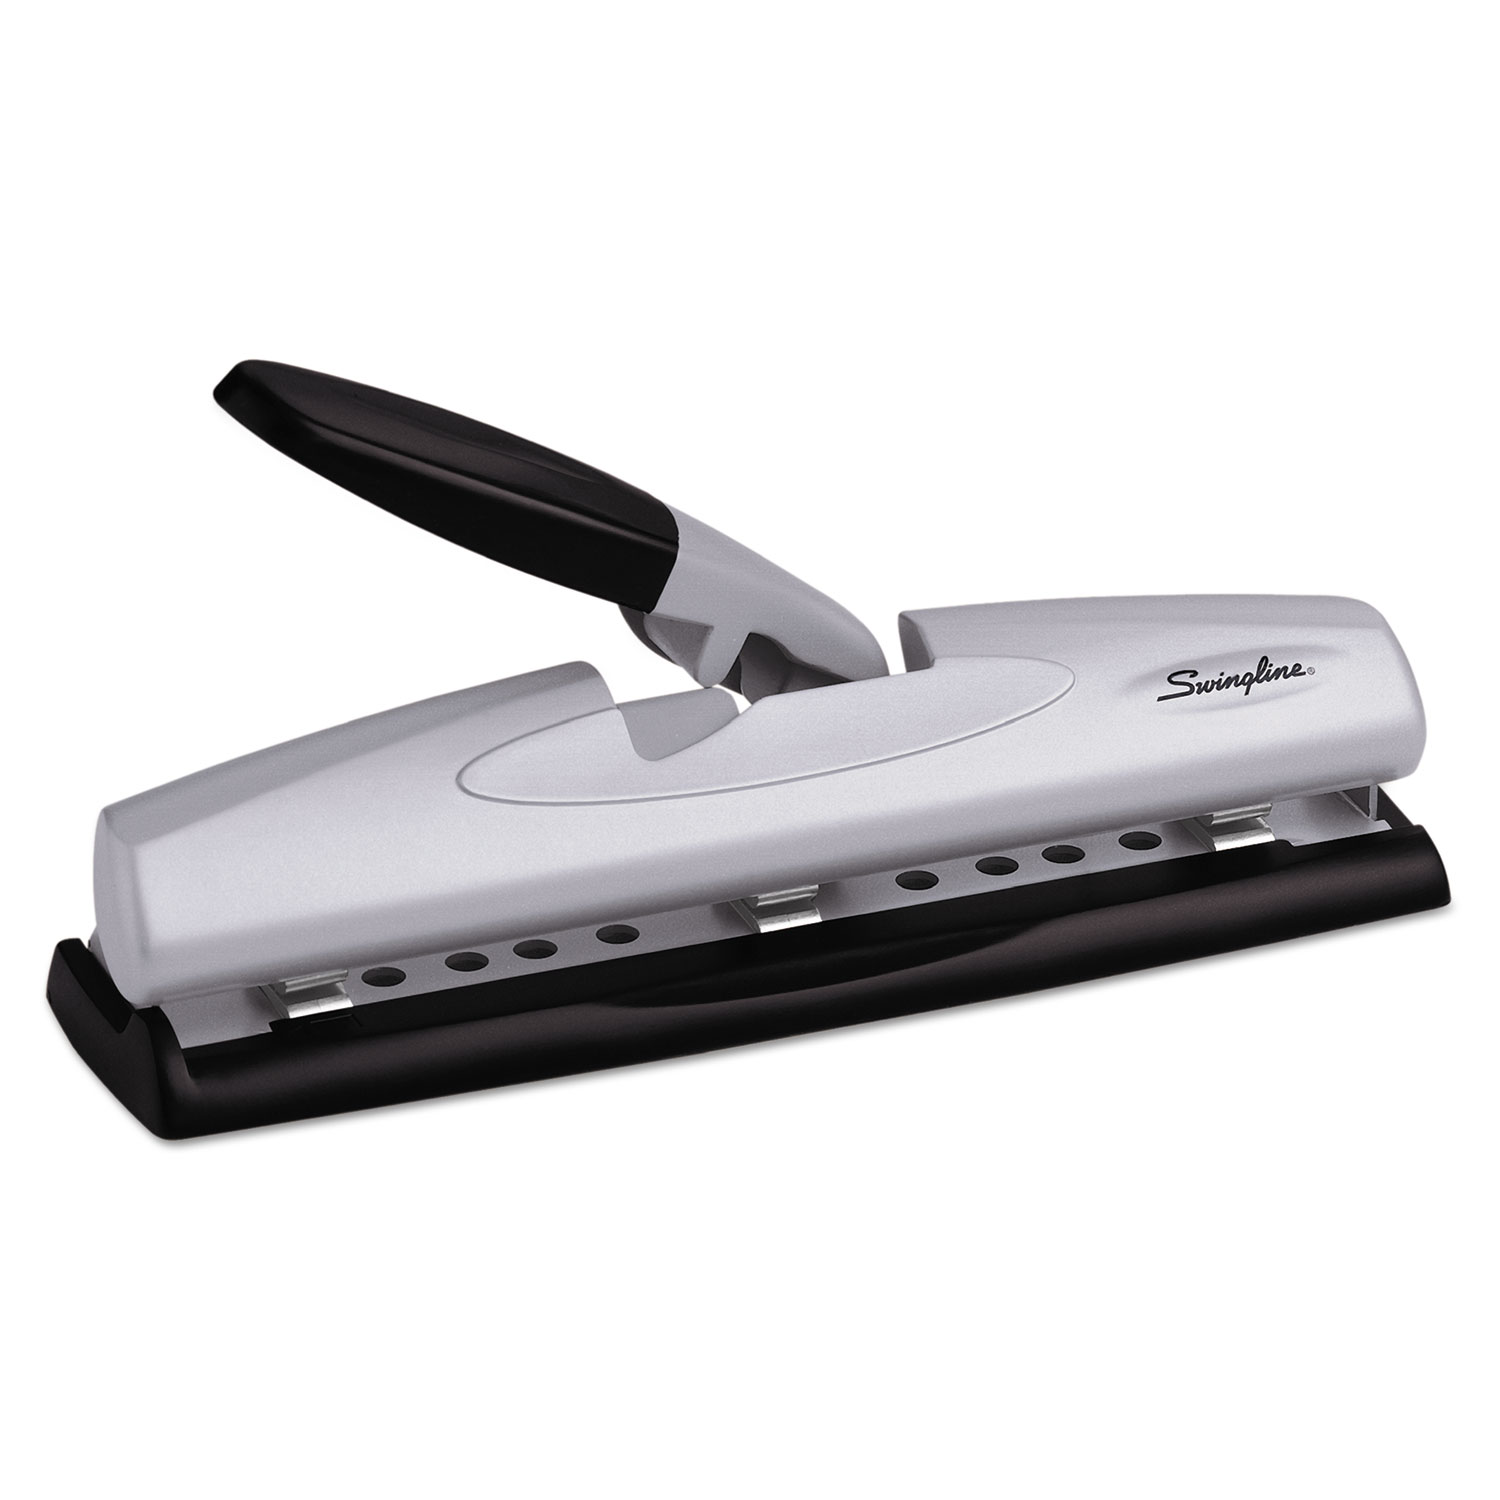 12-Sheet LightTouch Desktop Two-to-Three-Hole Punch, 9/32 Holes, Black/Silver